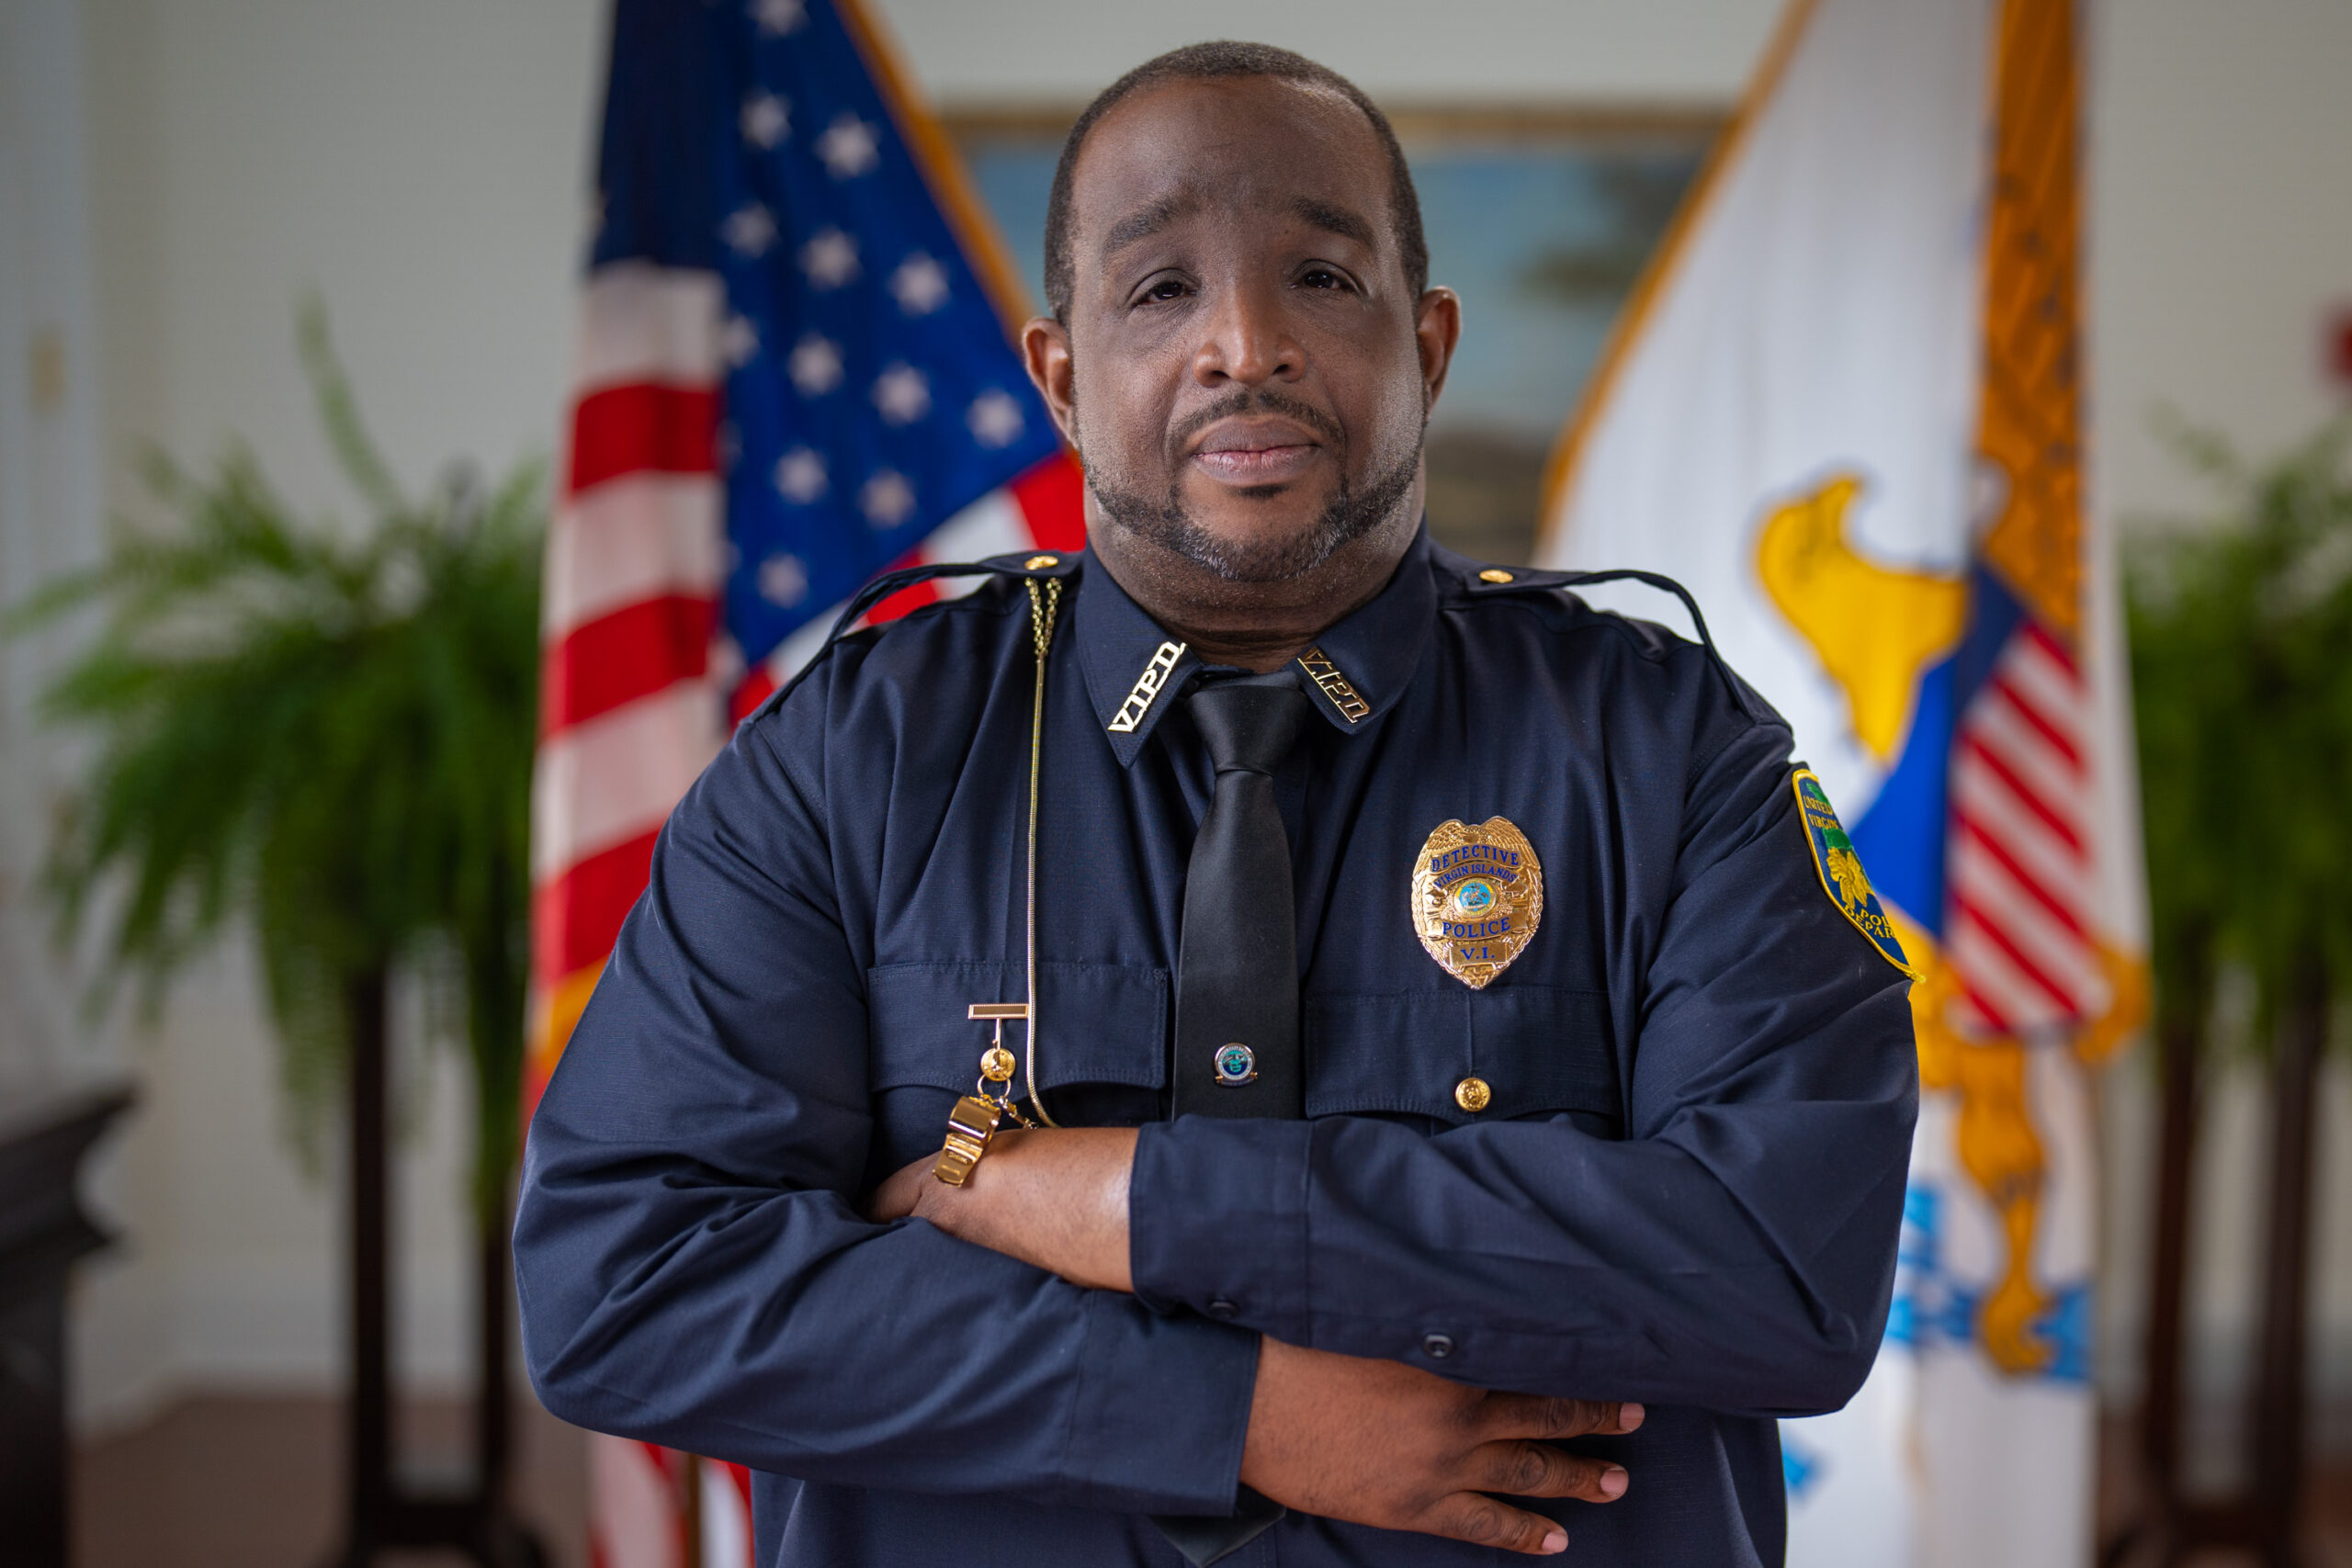 V.I. Police Department Detective Delberth Phipps Jr., 42, was shot and killed Tuesday while responding to an armed man at Hospital Ground, St. Thomas. (VIPD photo)